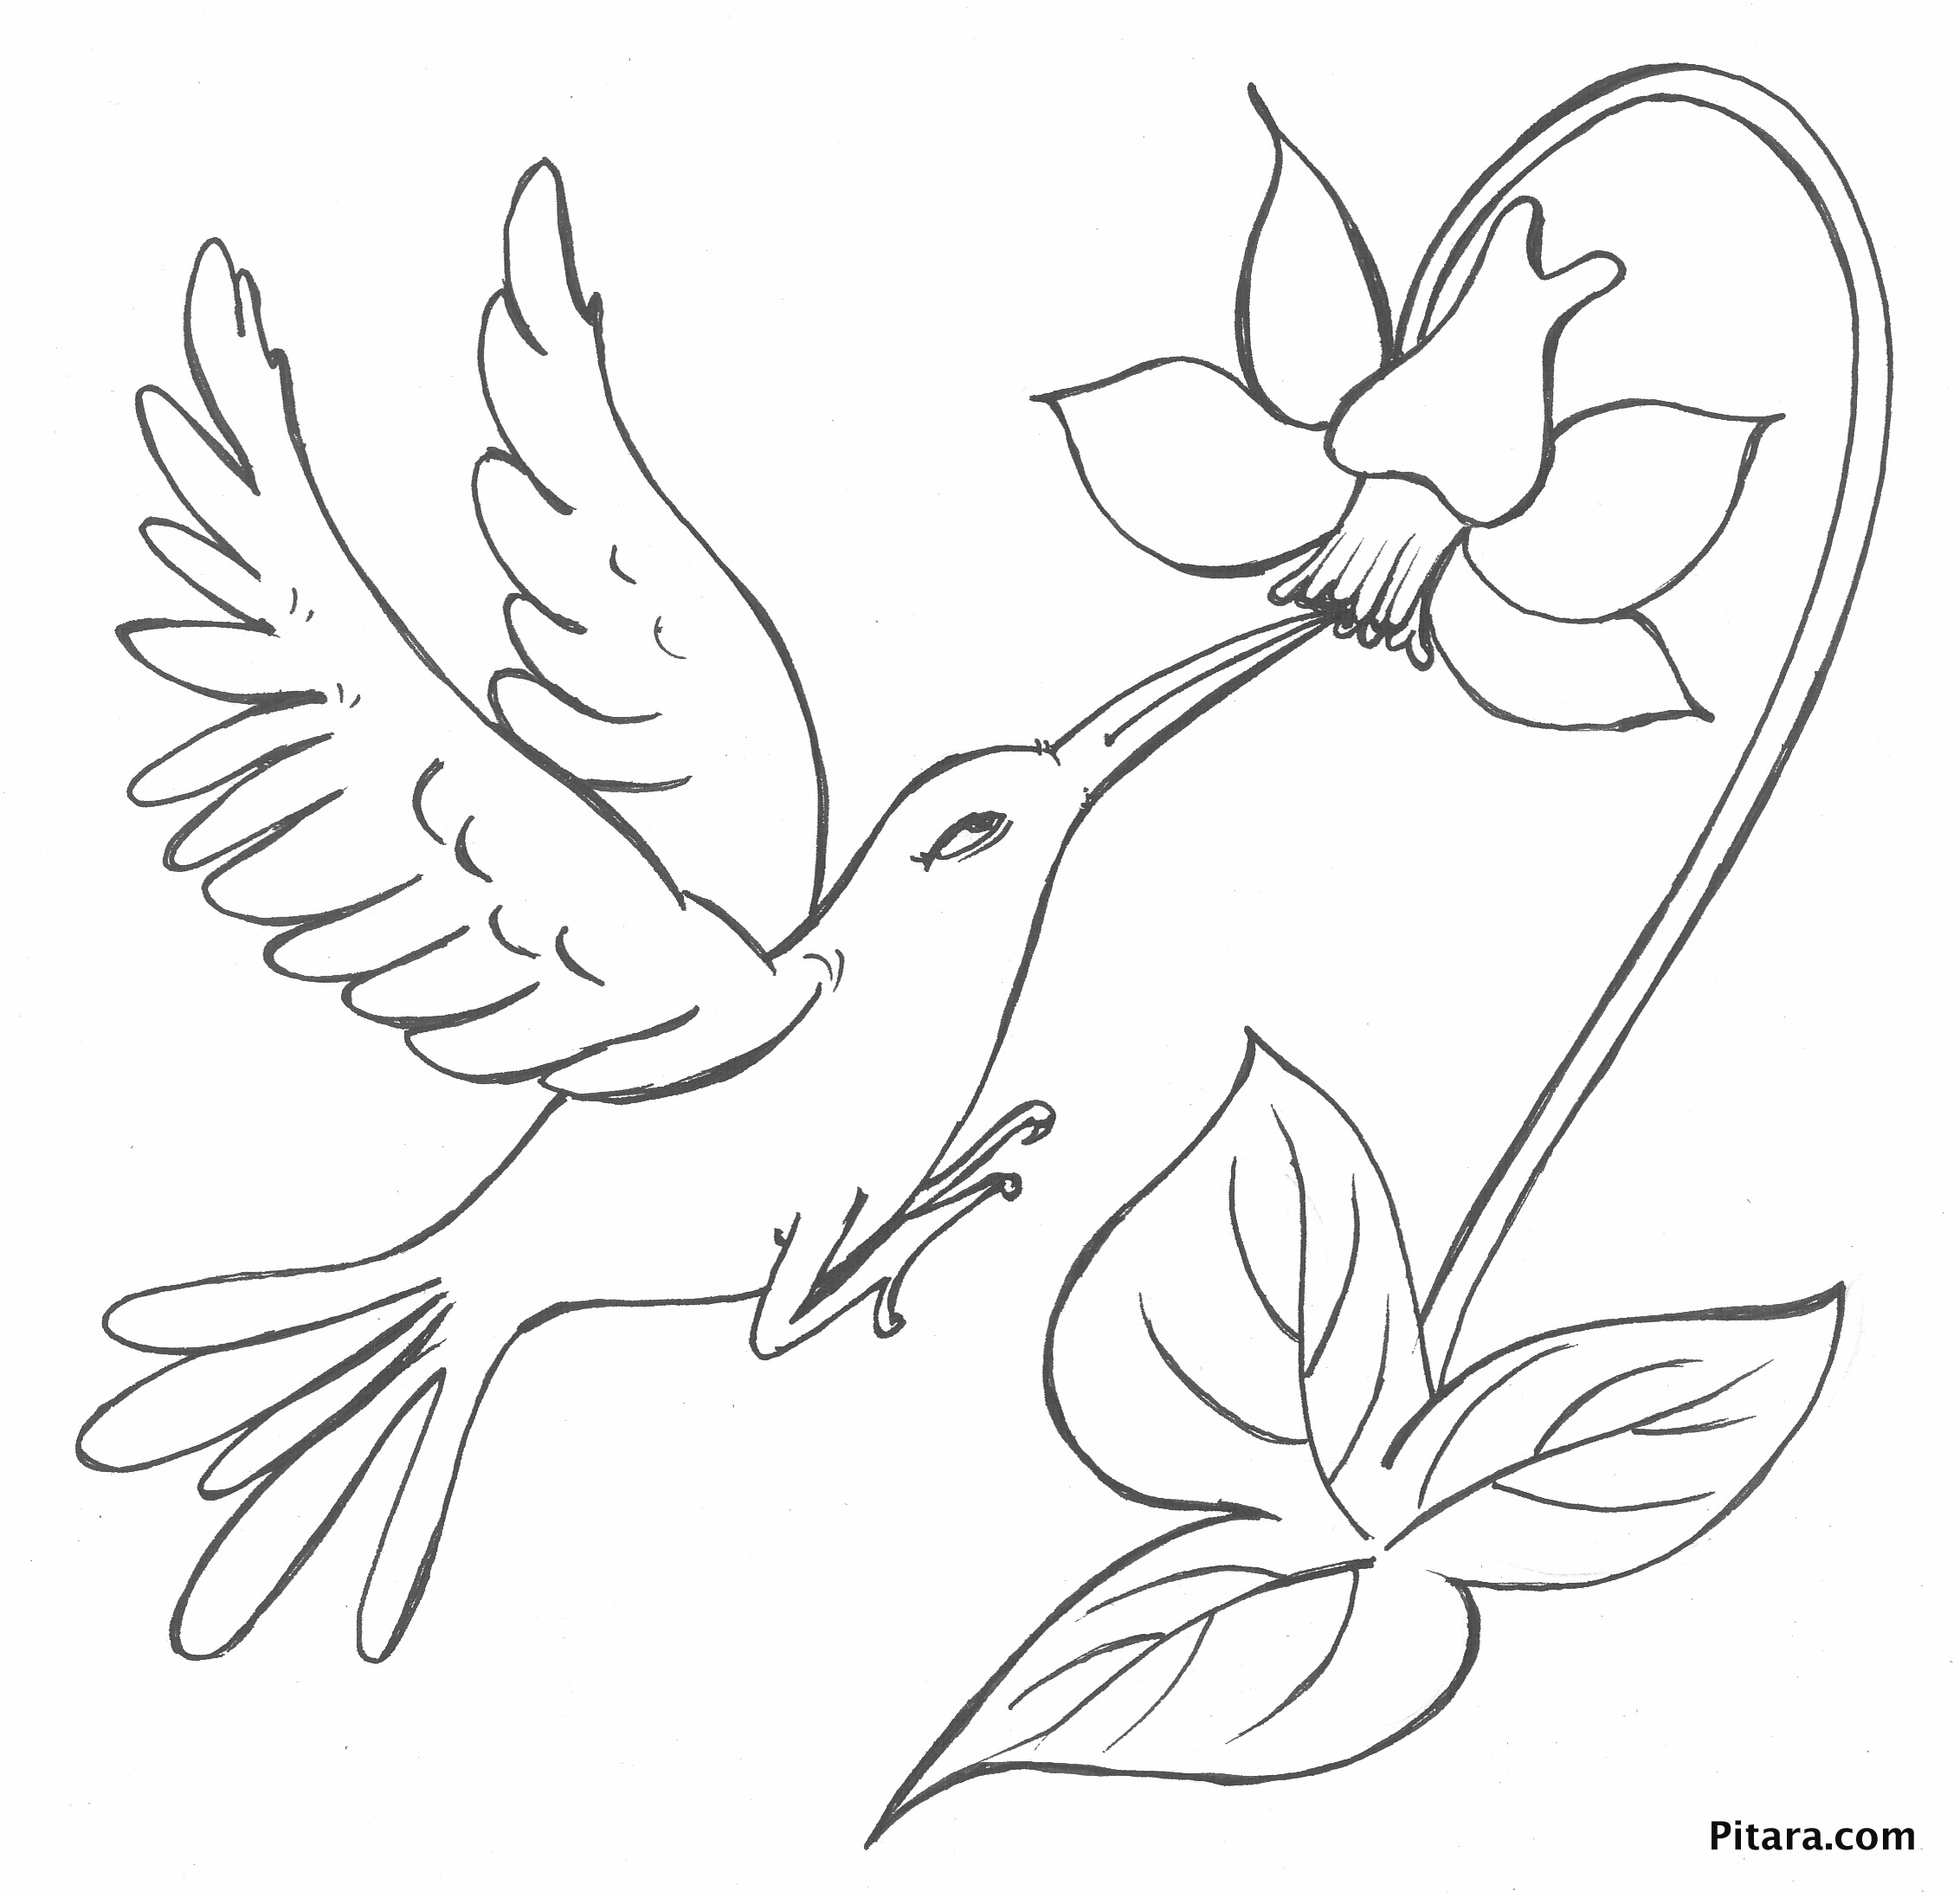 Bird with flower – Coloring page | Pitara Kids Network